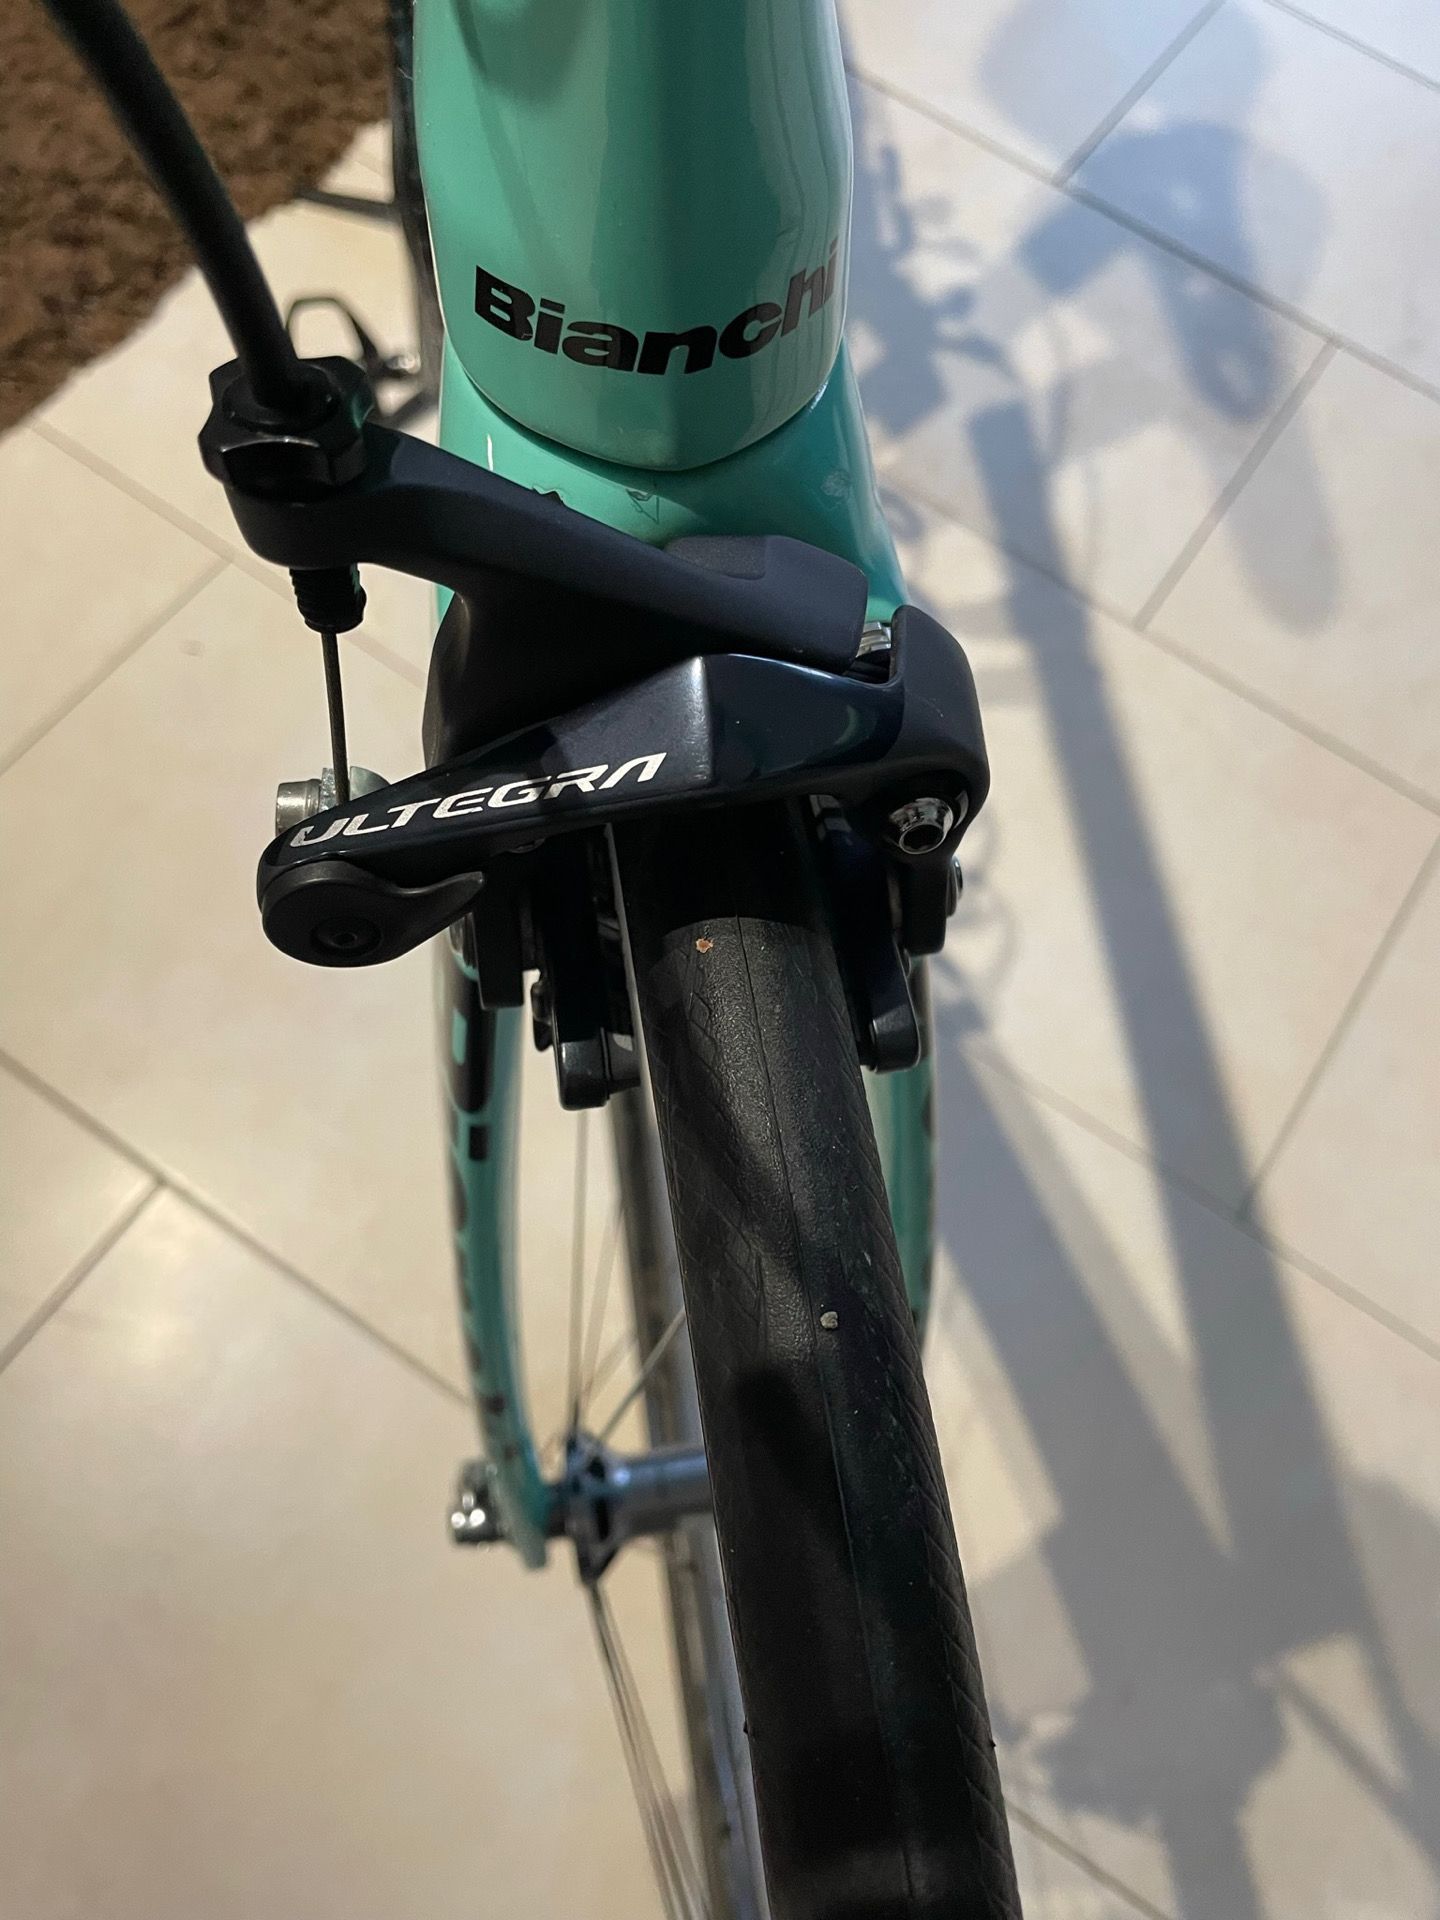 Bianchi Oltre XR.1 105 used in L | buycycle USA